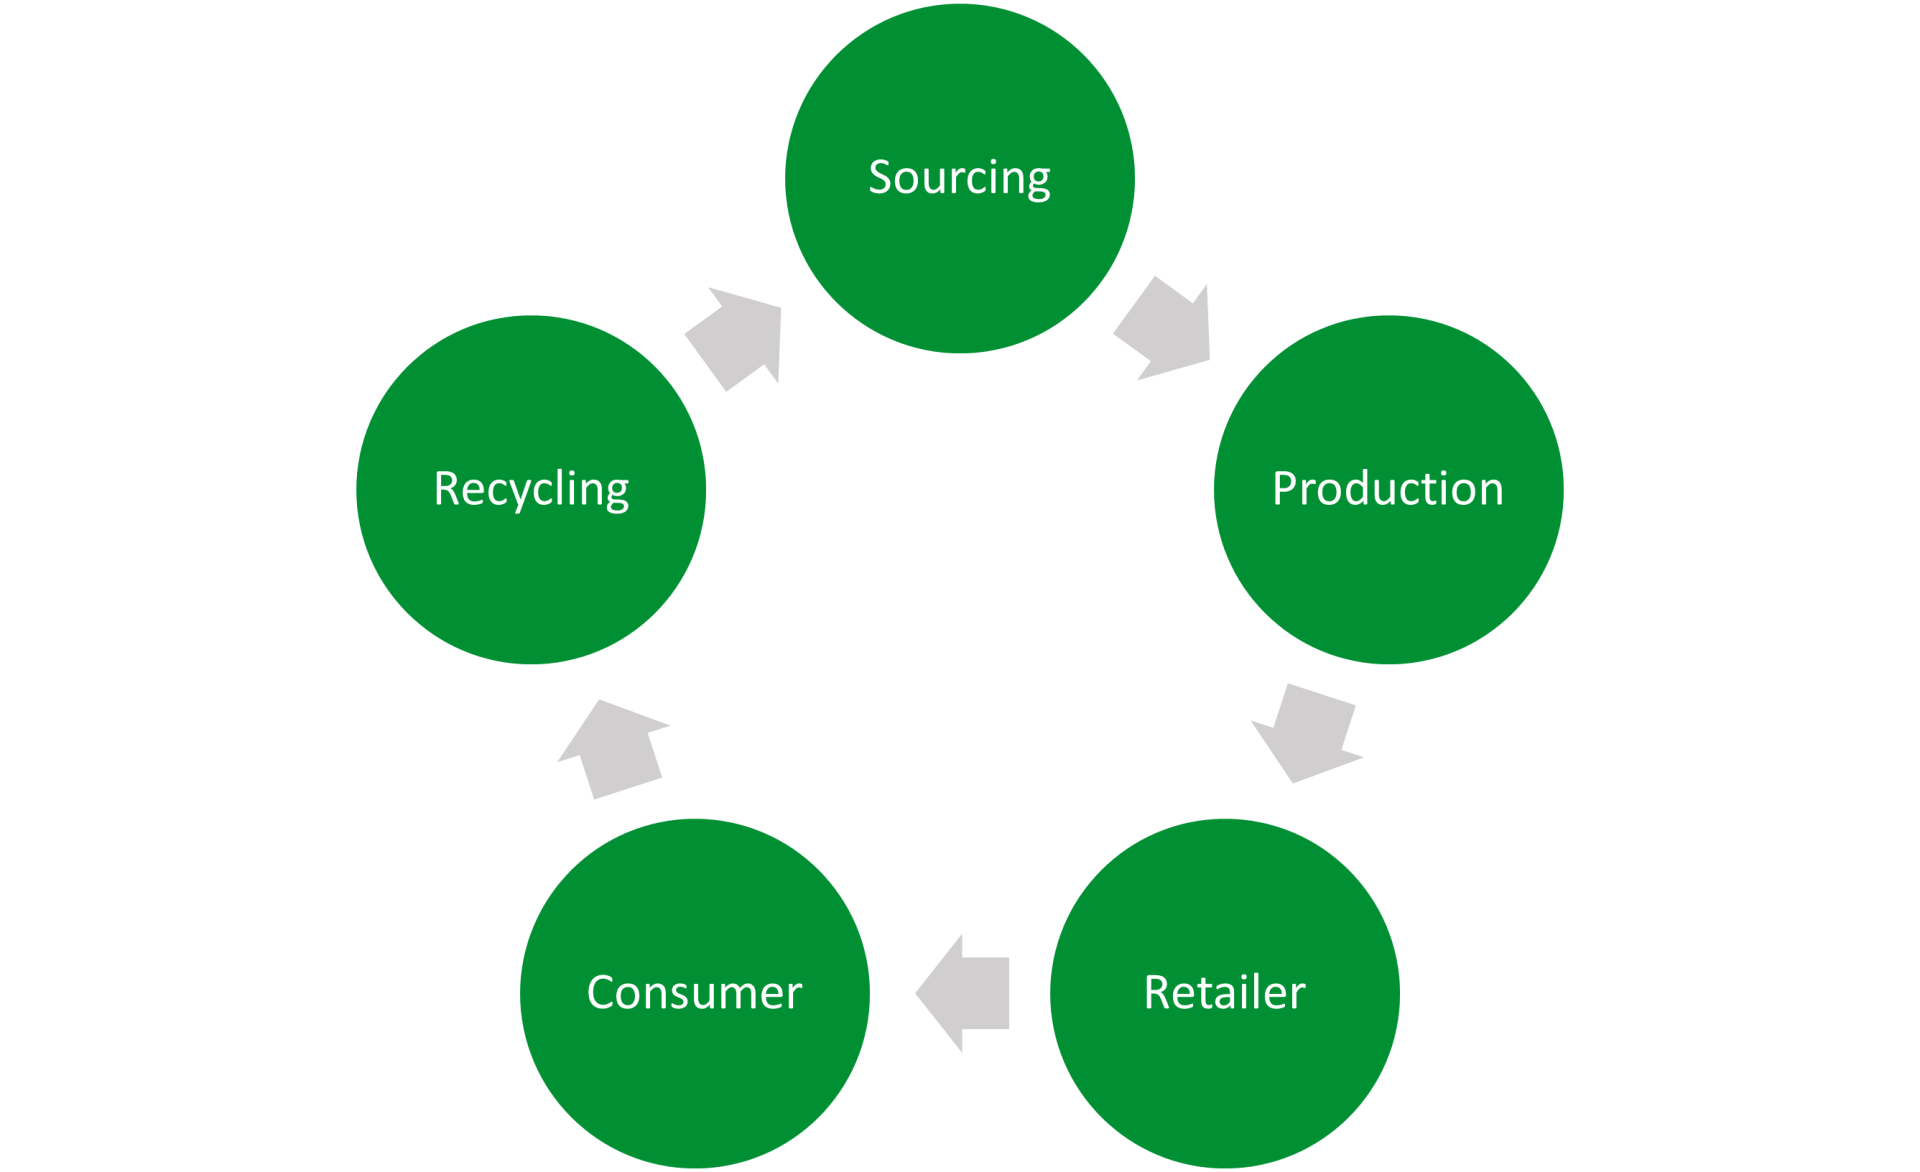 Cycle of Recycling - Sourcing, Production, Retailer, Consumer, and Recycling